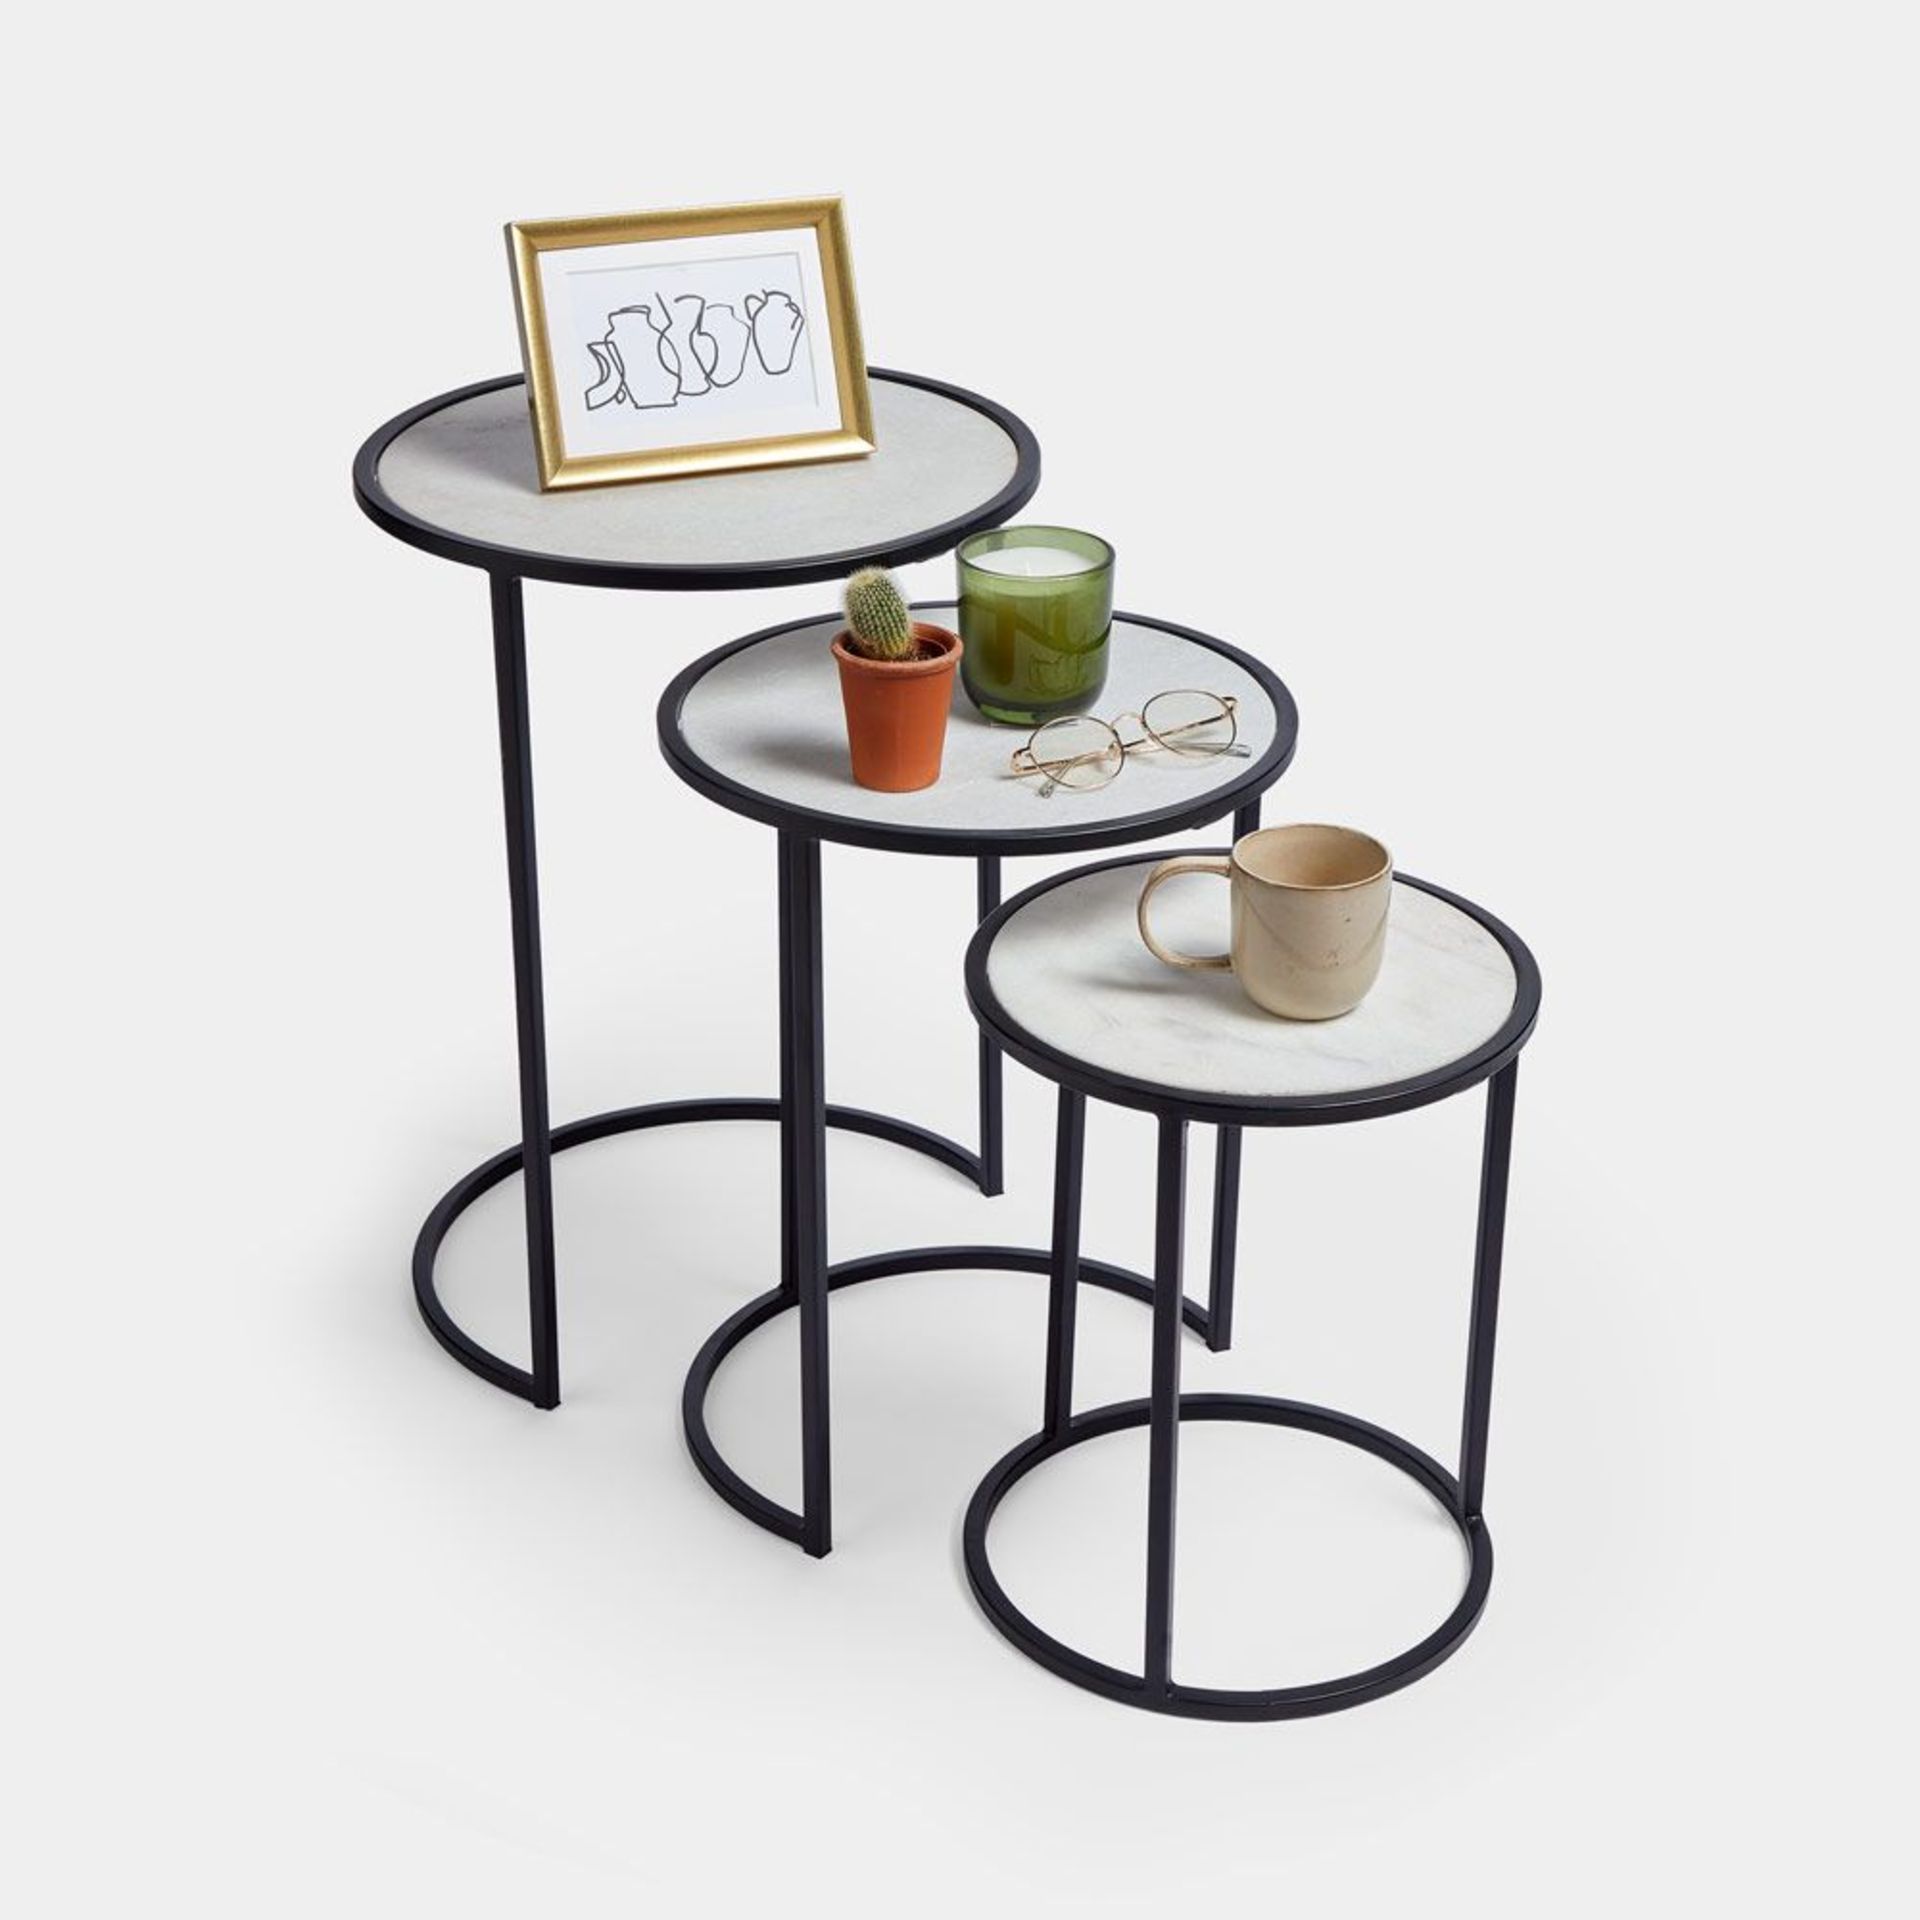 Halmore Set of 3 Marble Side Tables. - BI. With modern black iron legs holding a luxurious marble